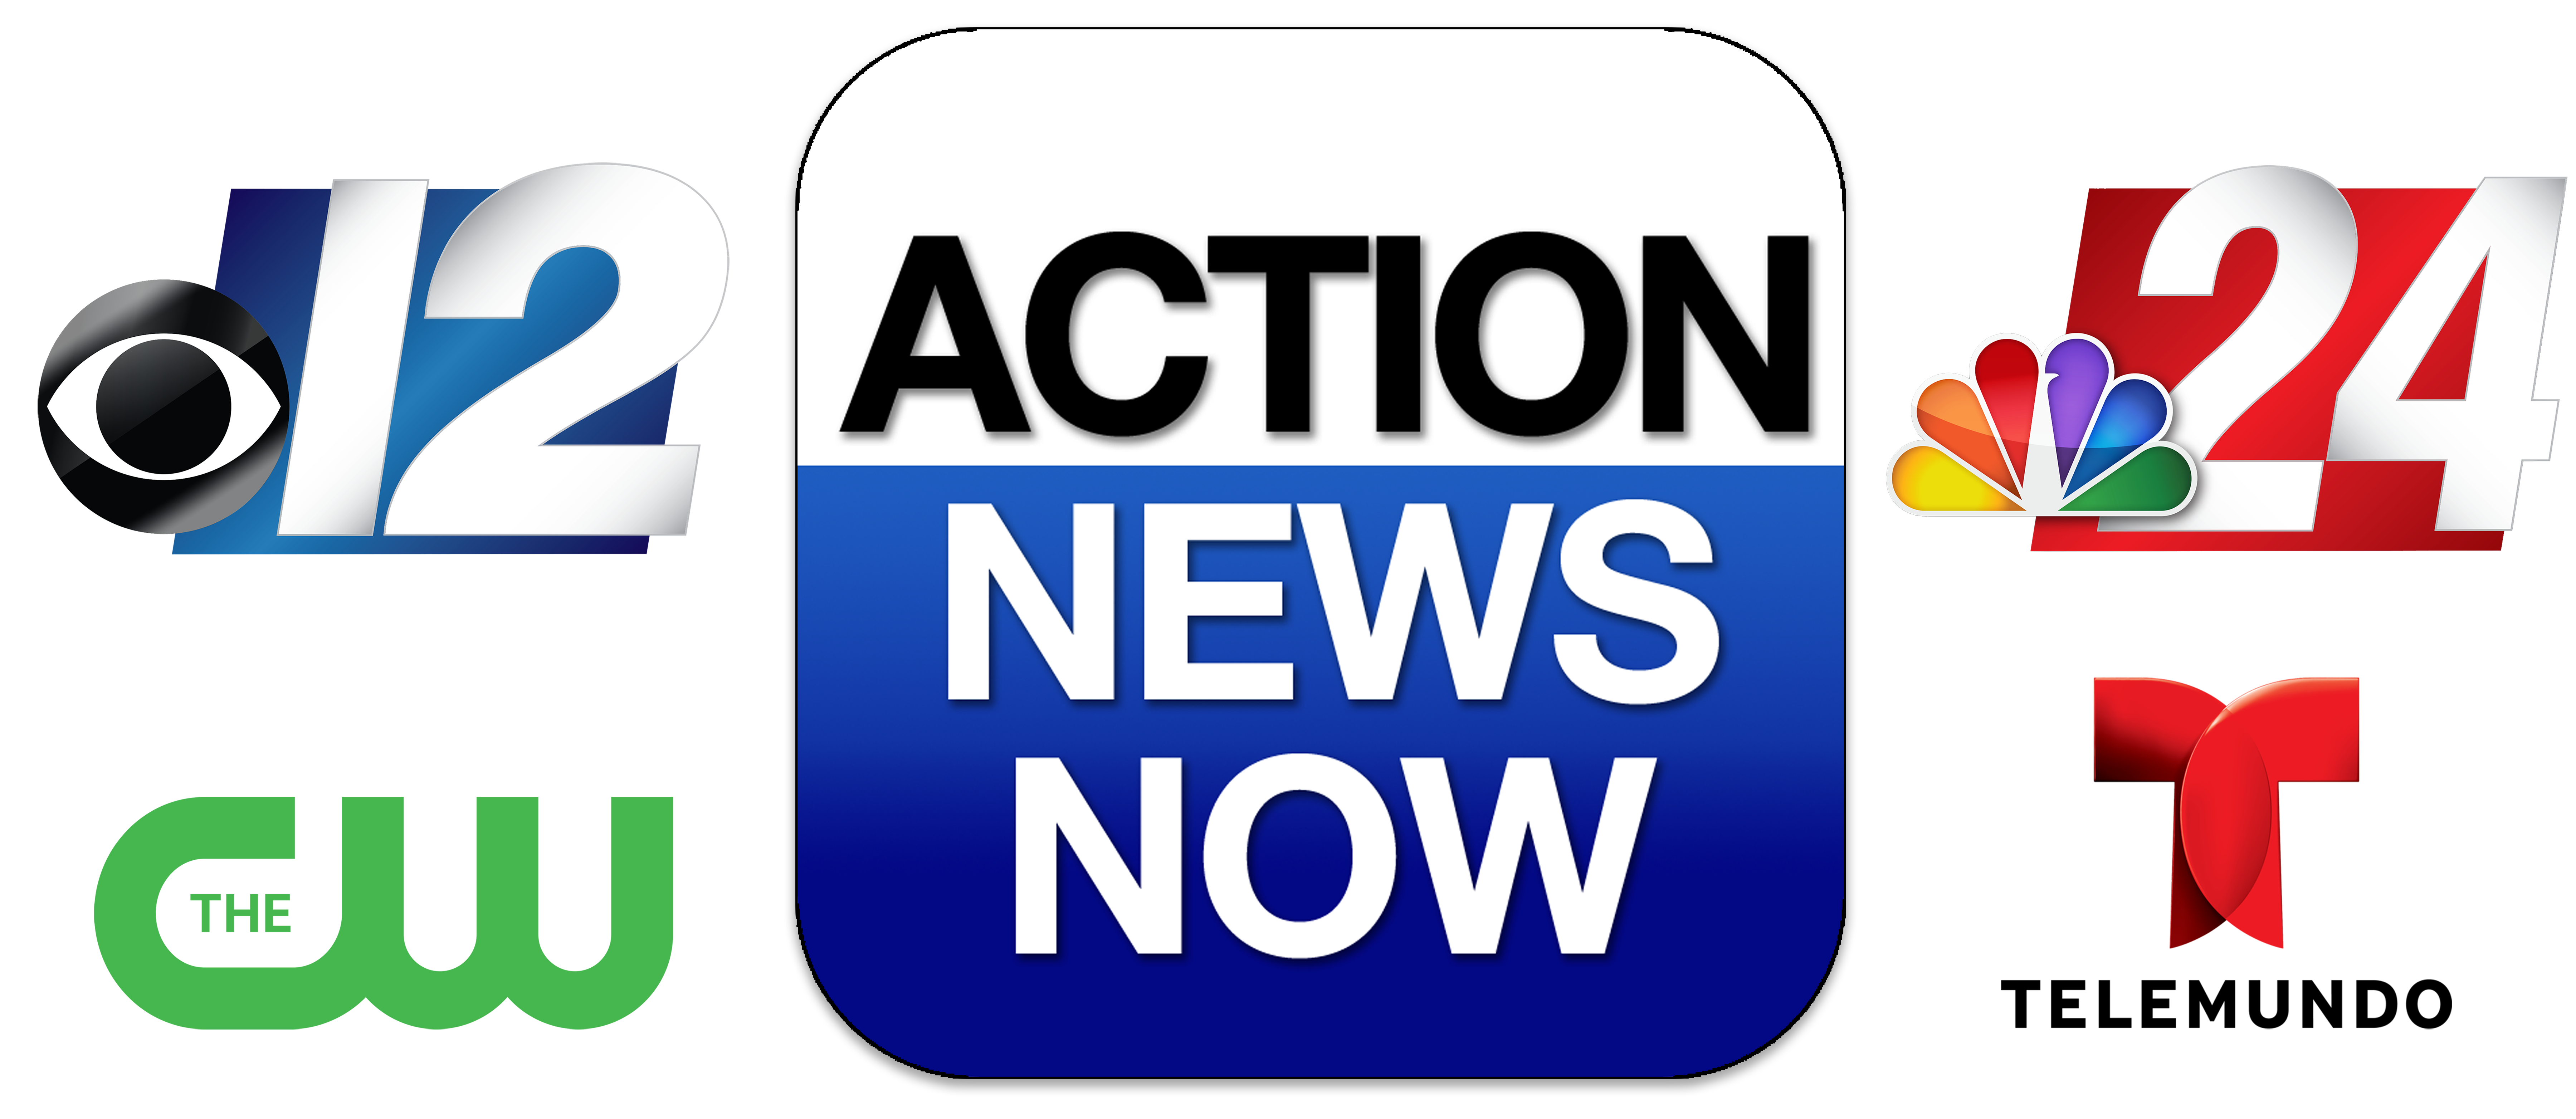 Action News Now (Media)